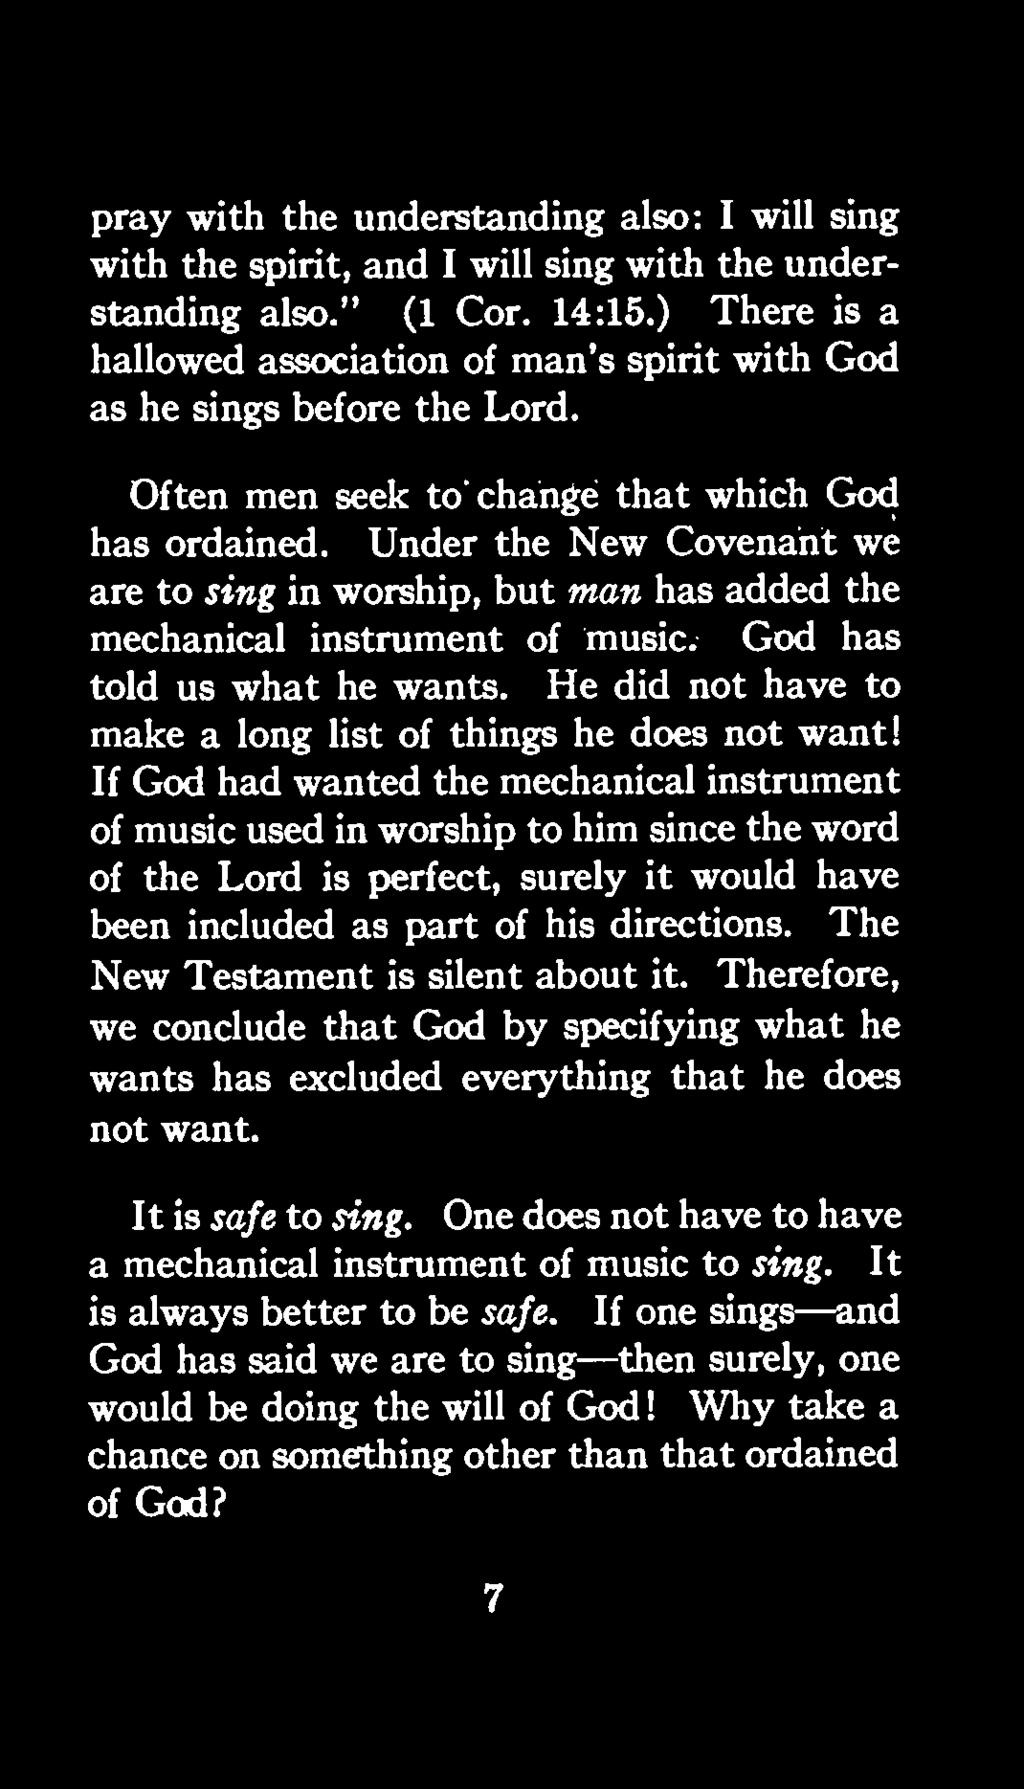 If God had wanted the mechanical instrument of music used in worship to him since the word of the Lord is perfect, surely it would have been included as part of his directions.